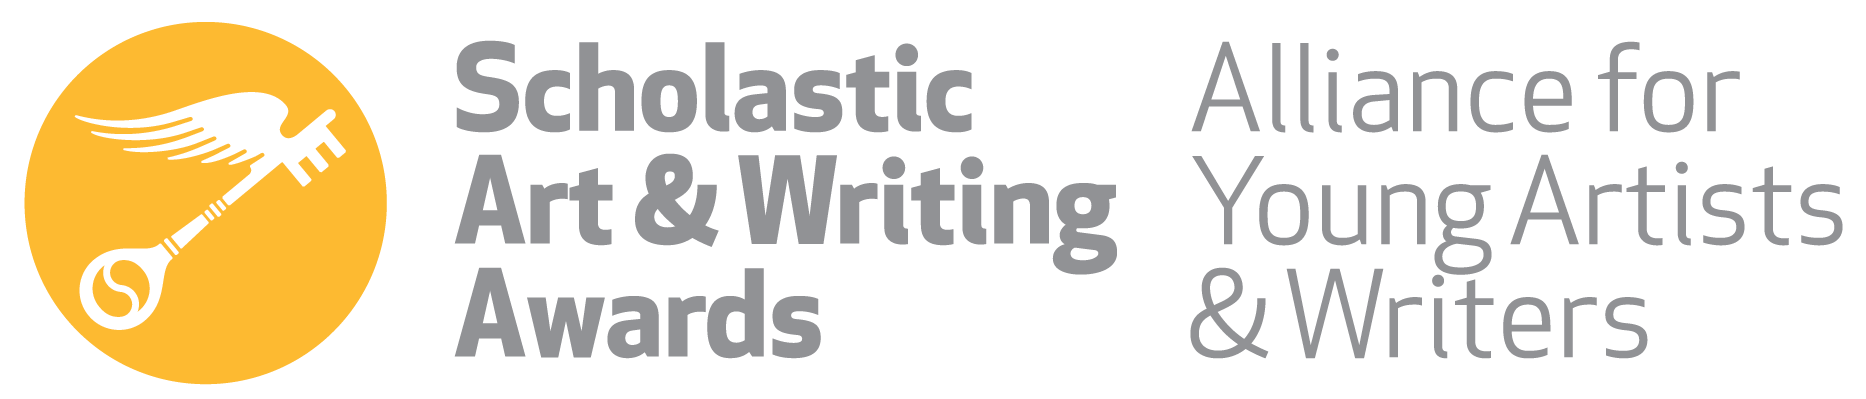 Scholastic Art & Writing Awards now accepting submissions for The Ray Bradbury Award for Science Fiction & Fantasy